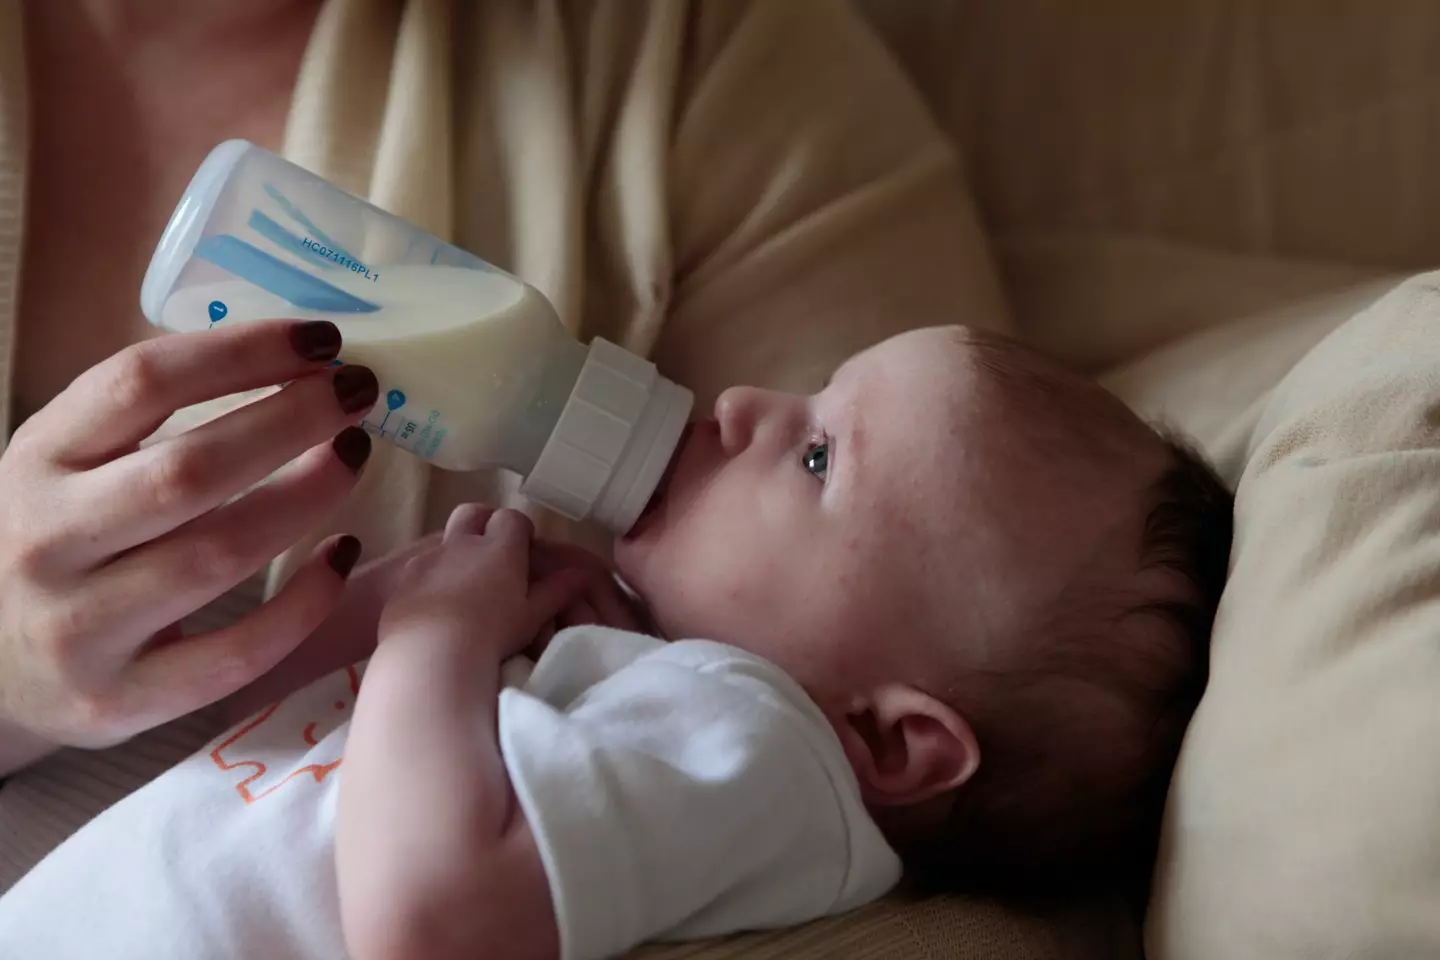 Formula milk in the US has been in short supply due to ongoing supply disruptions and recent safety recalls.